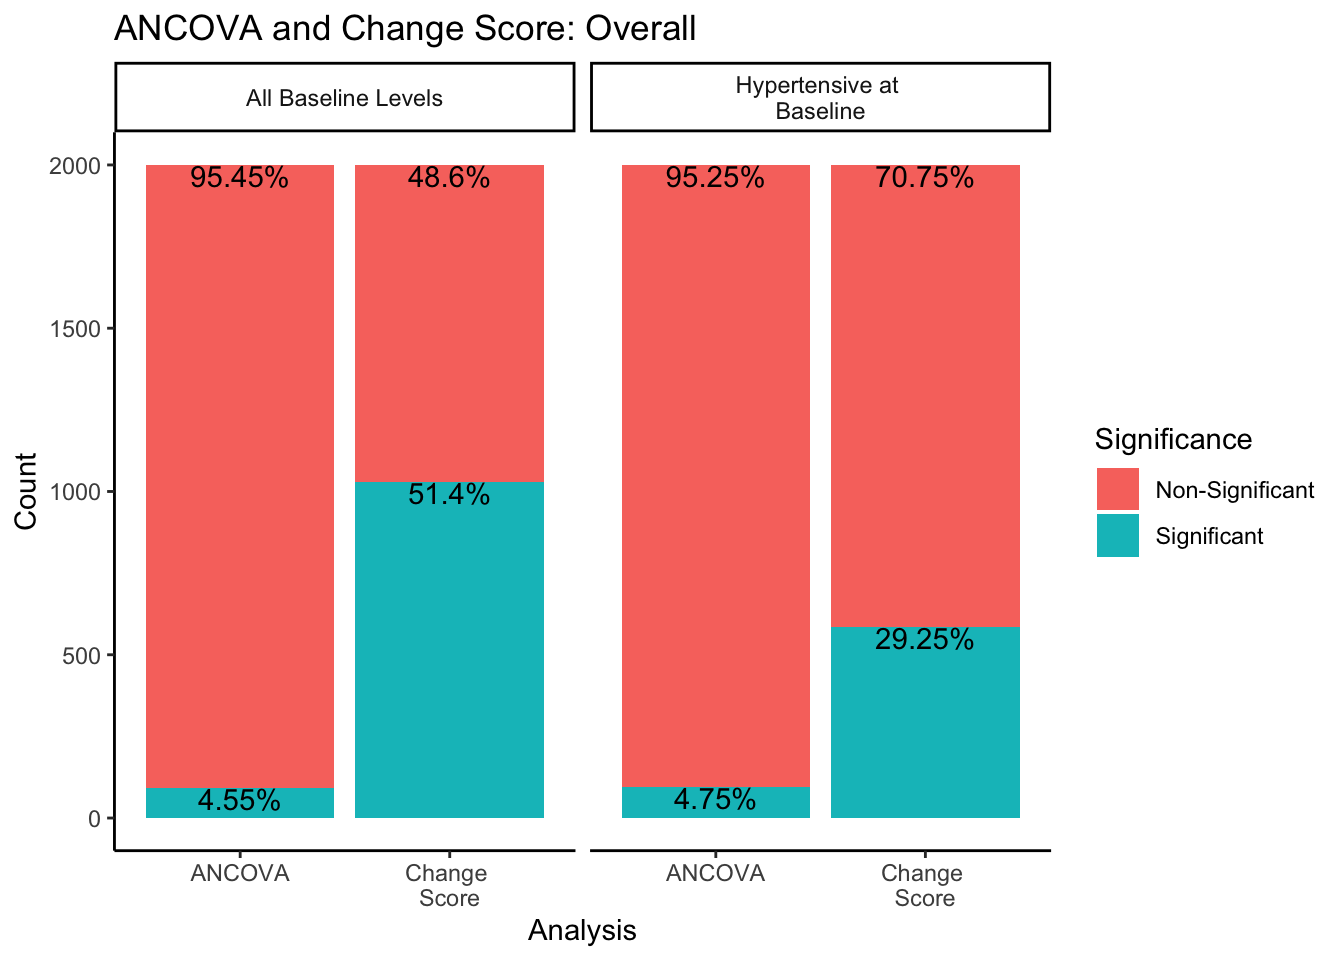 Barplot of significance proportions using ANCOVA and Change score analyses split by All Baseline Levels and Hypertensive at Baseline samples. Within All Baseline Levels, 4.55% of iterations were significant using ANCOVA, while 51.4% were significant using Change Score analysis. Within Hypertensive at Baseline samples, 4.75% of iterations were significant using an ANCOVA while 29.25% were significant using Change Score analysis.